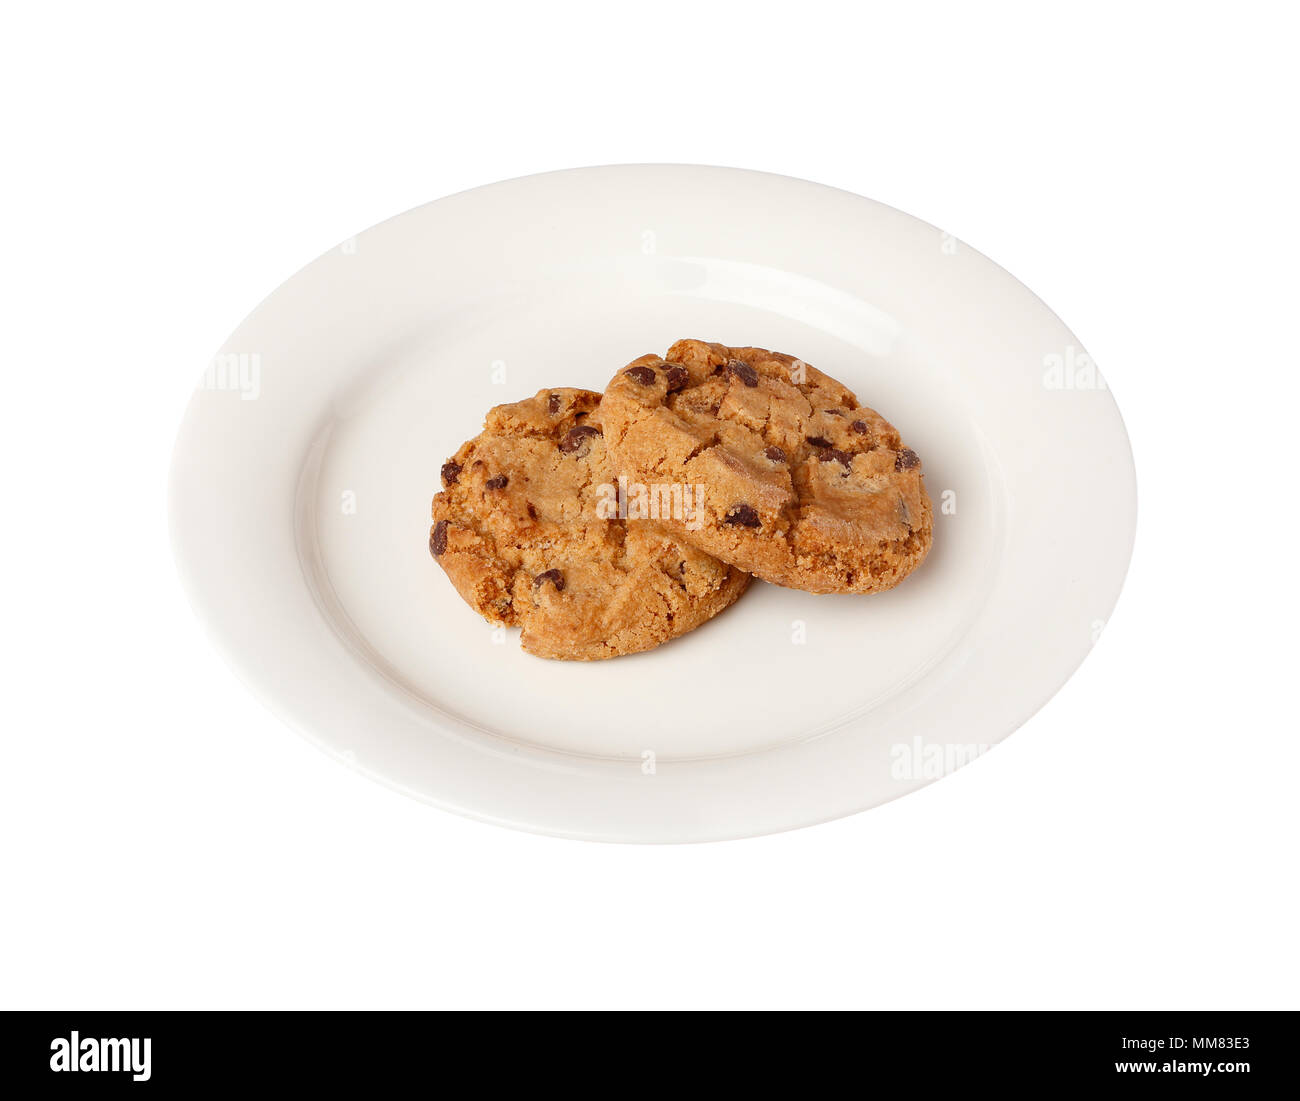 Two chocolate chip cookies on a white small plate isolated on white bakground. Stock Photo